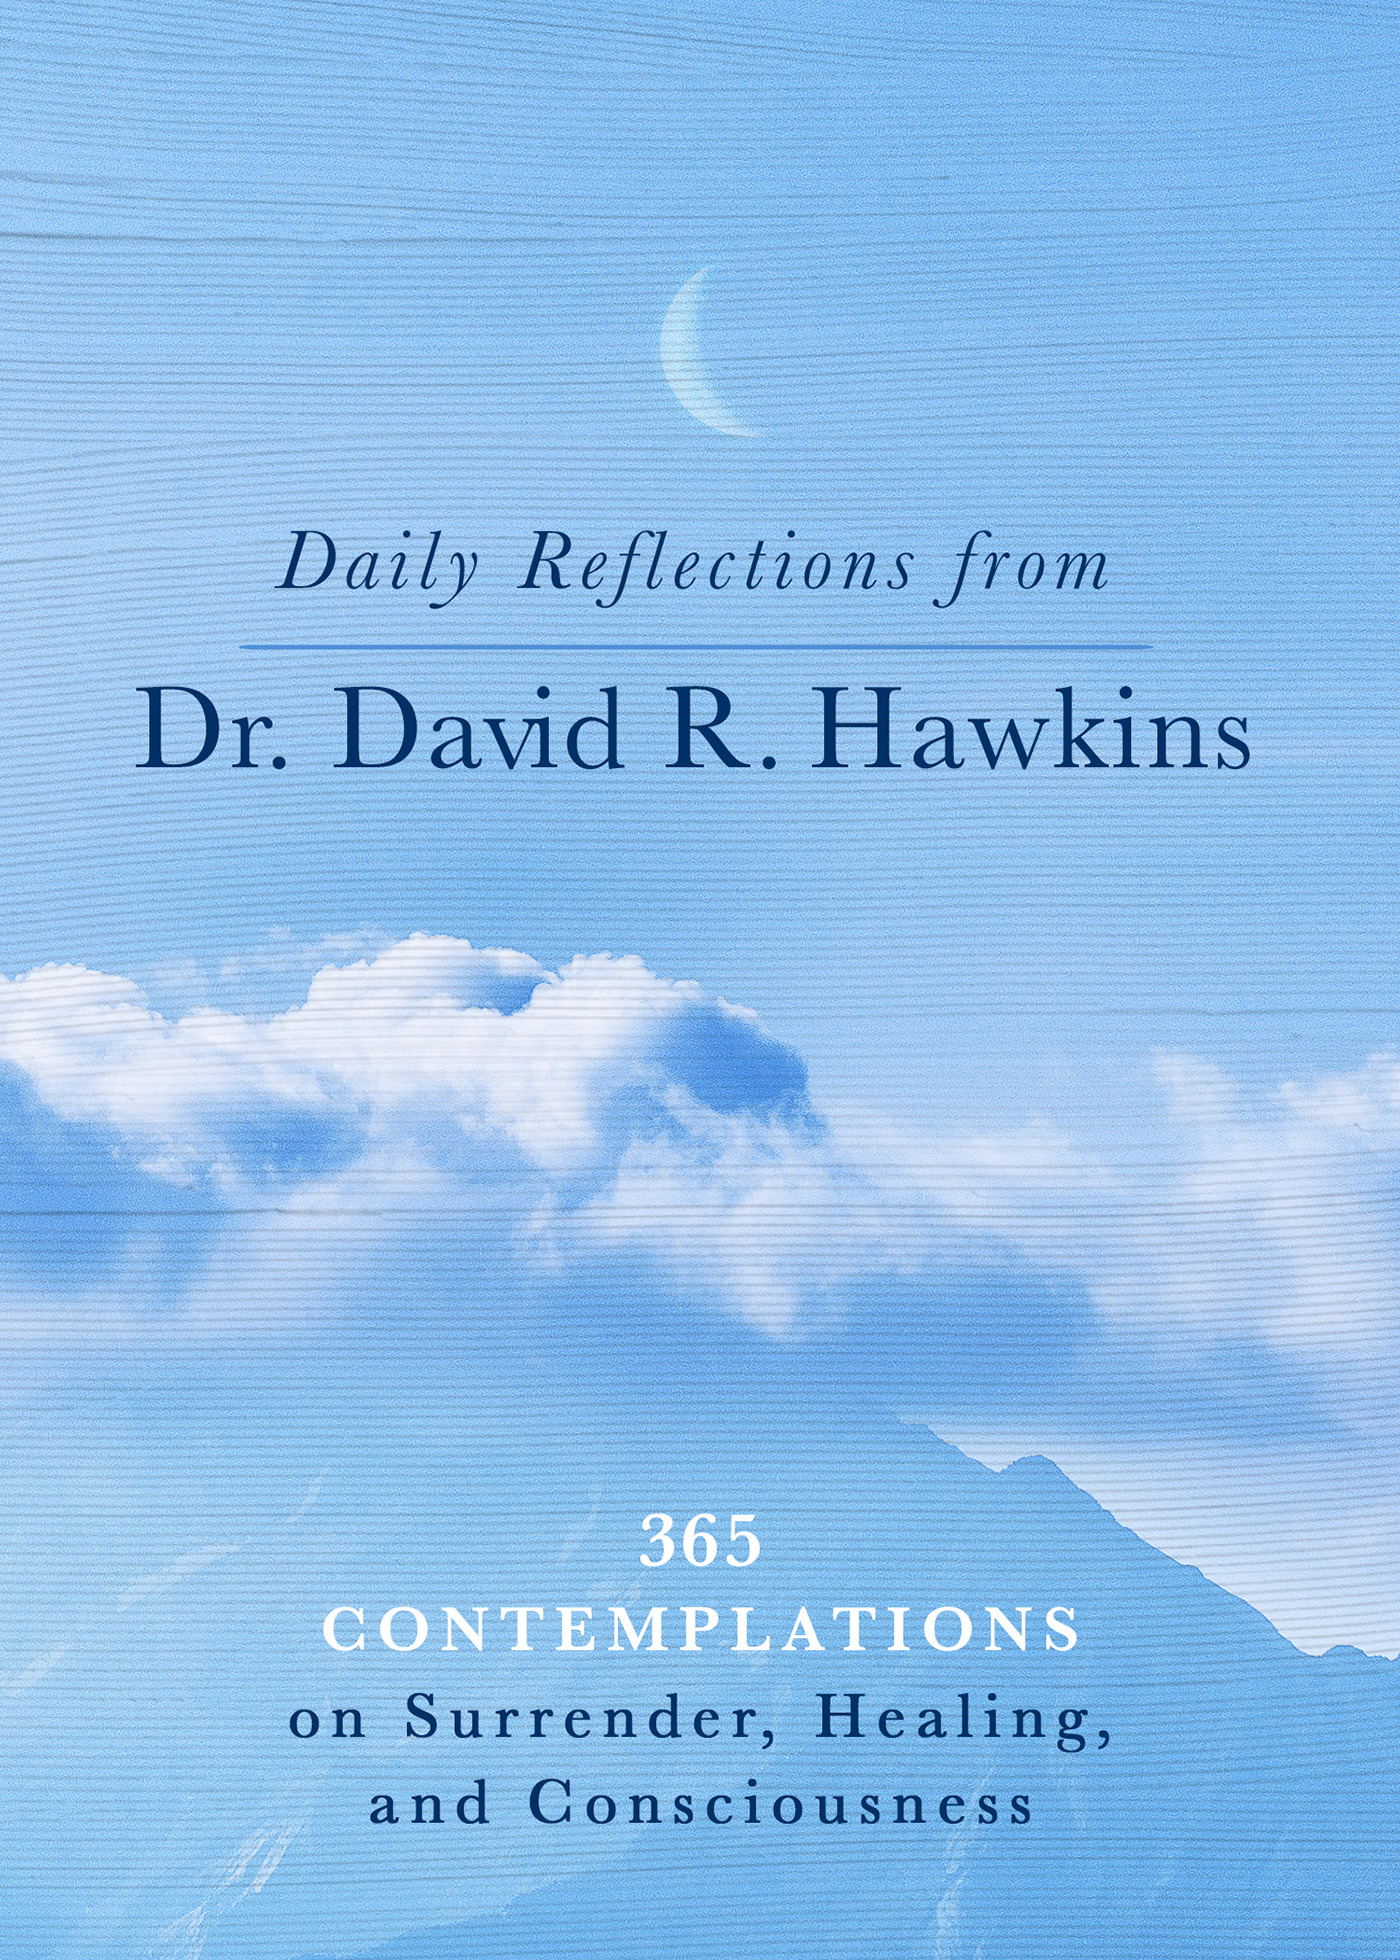 Daily Reflections from Dr. David R. Hawkins : 365 Contemplations on Surrender, Healing, and Consciousness | Hawkins, David R.